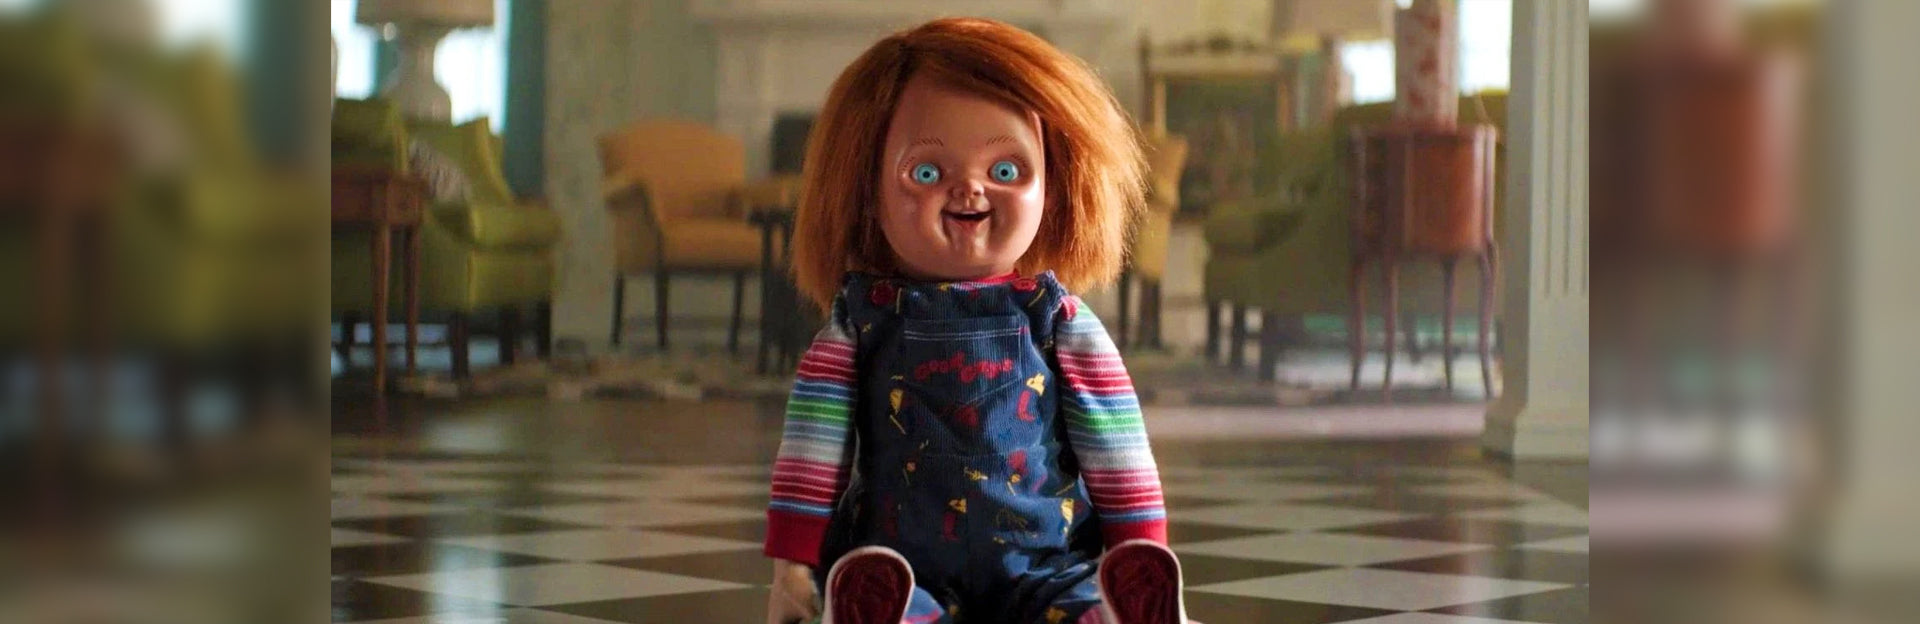 How Tall Is The Chucky Doll? Don't Miss Out! (2023 Updated)